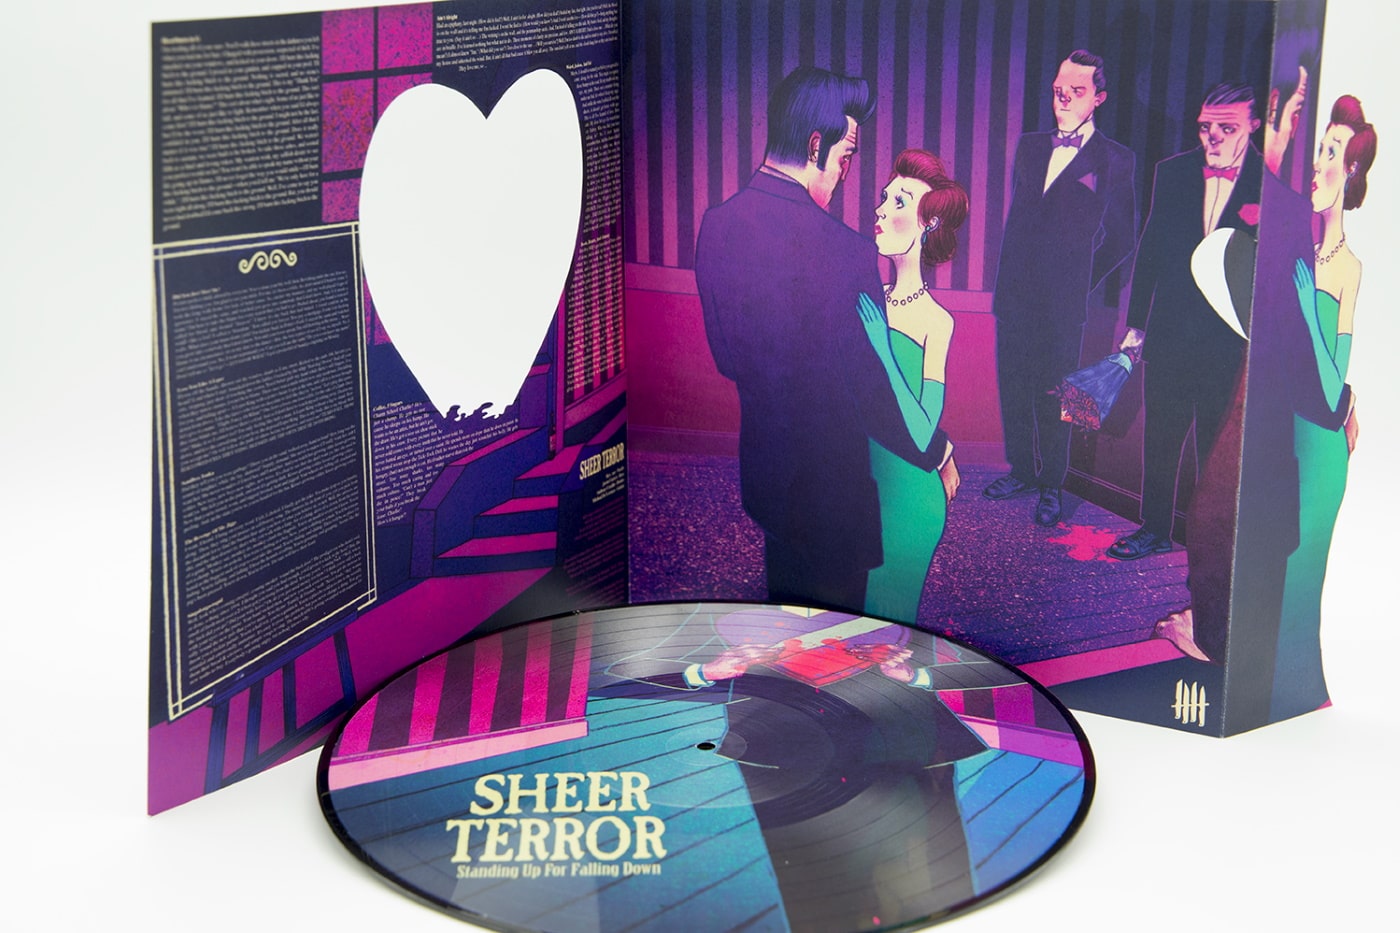 SHEER TERROR “Standing Up For Falling Down” Picture Disc 12″ vinyl, “Heart” Edition